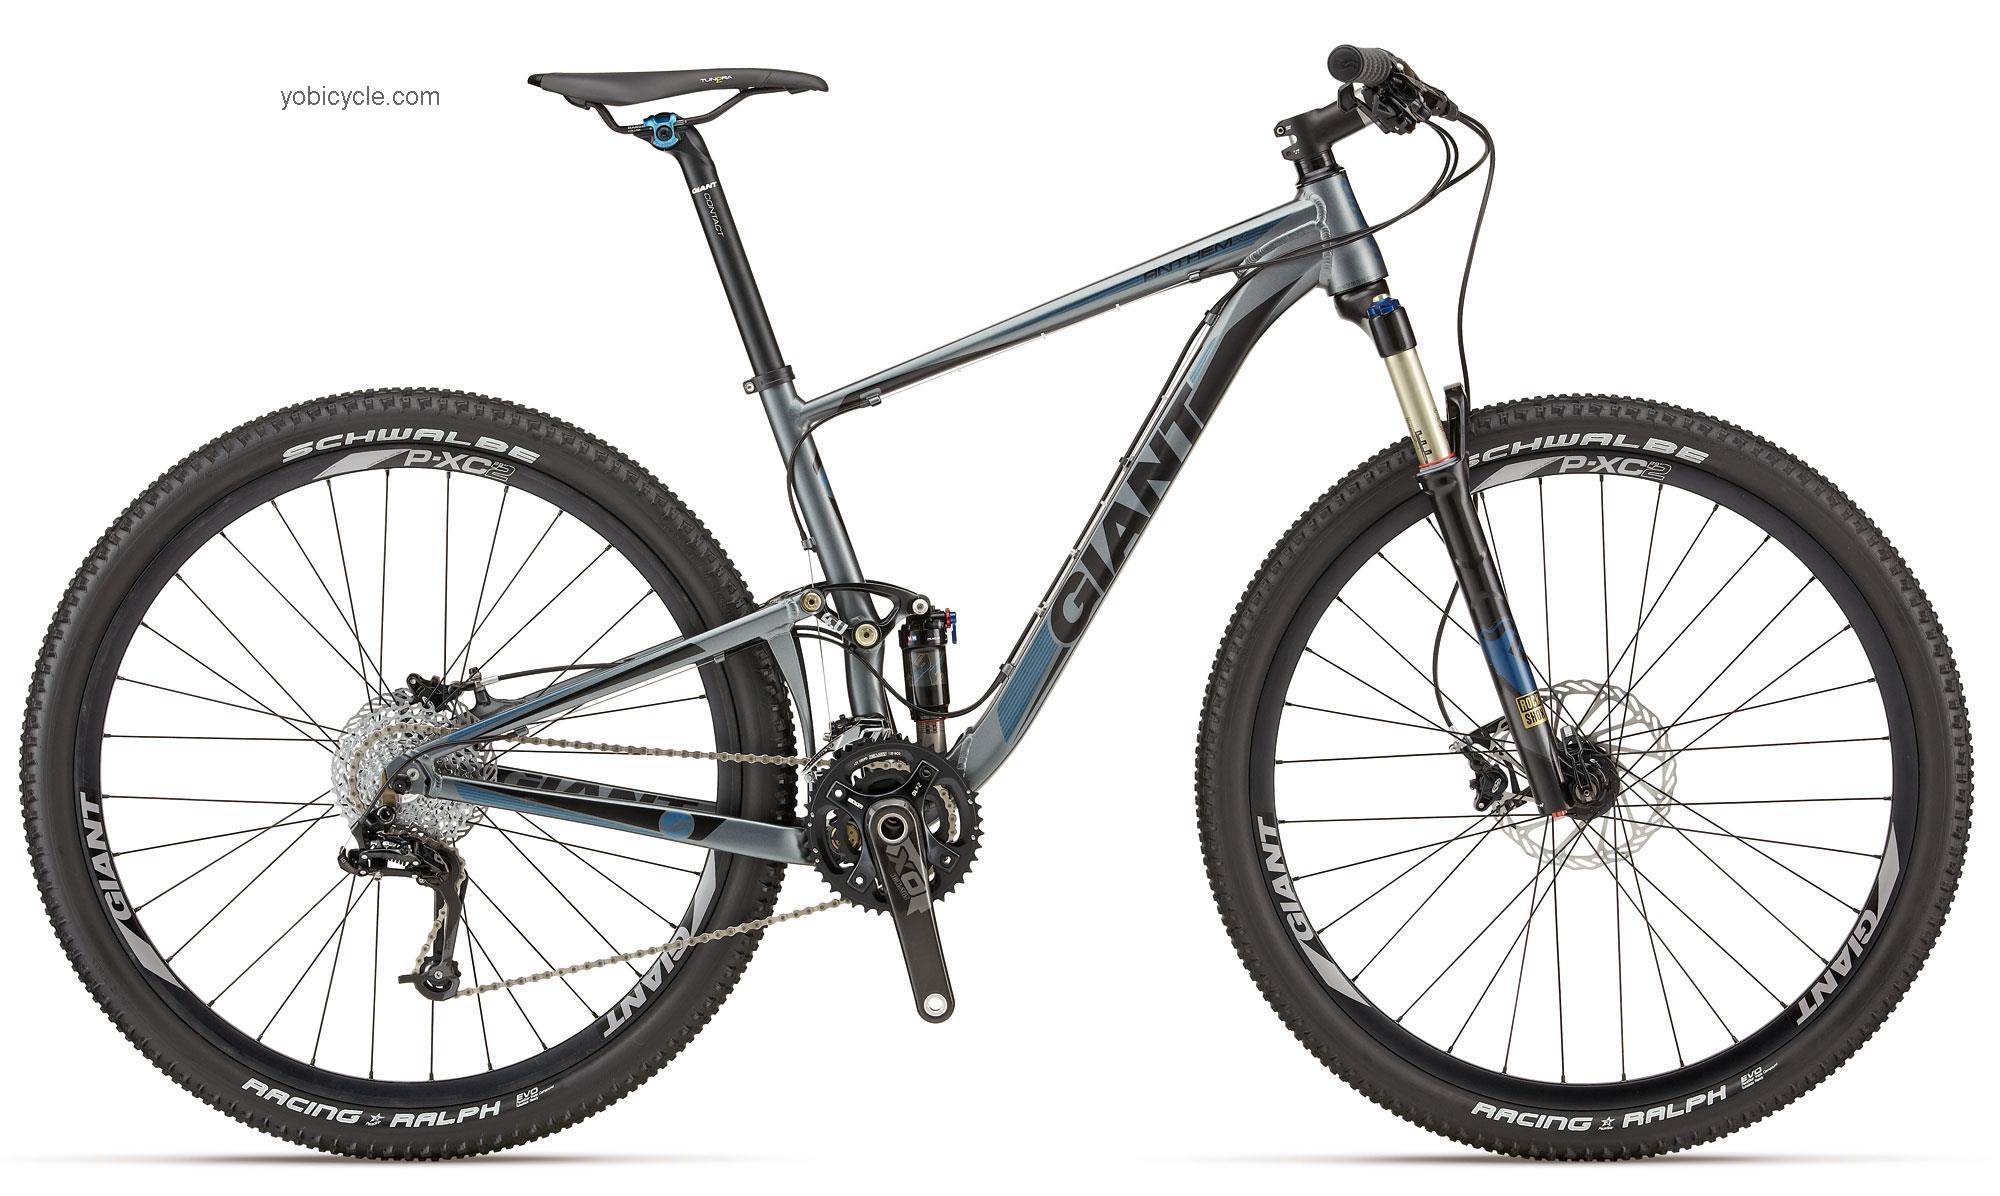 Giant Anthem X 29er 0 2012 comparison online with competitors